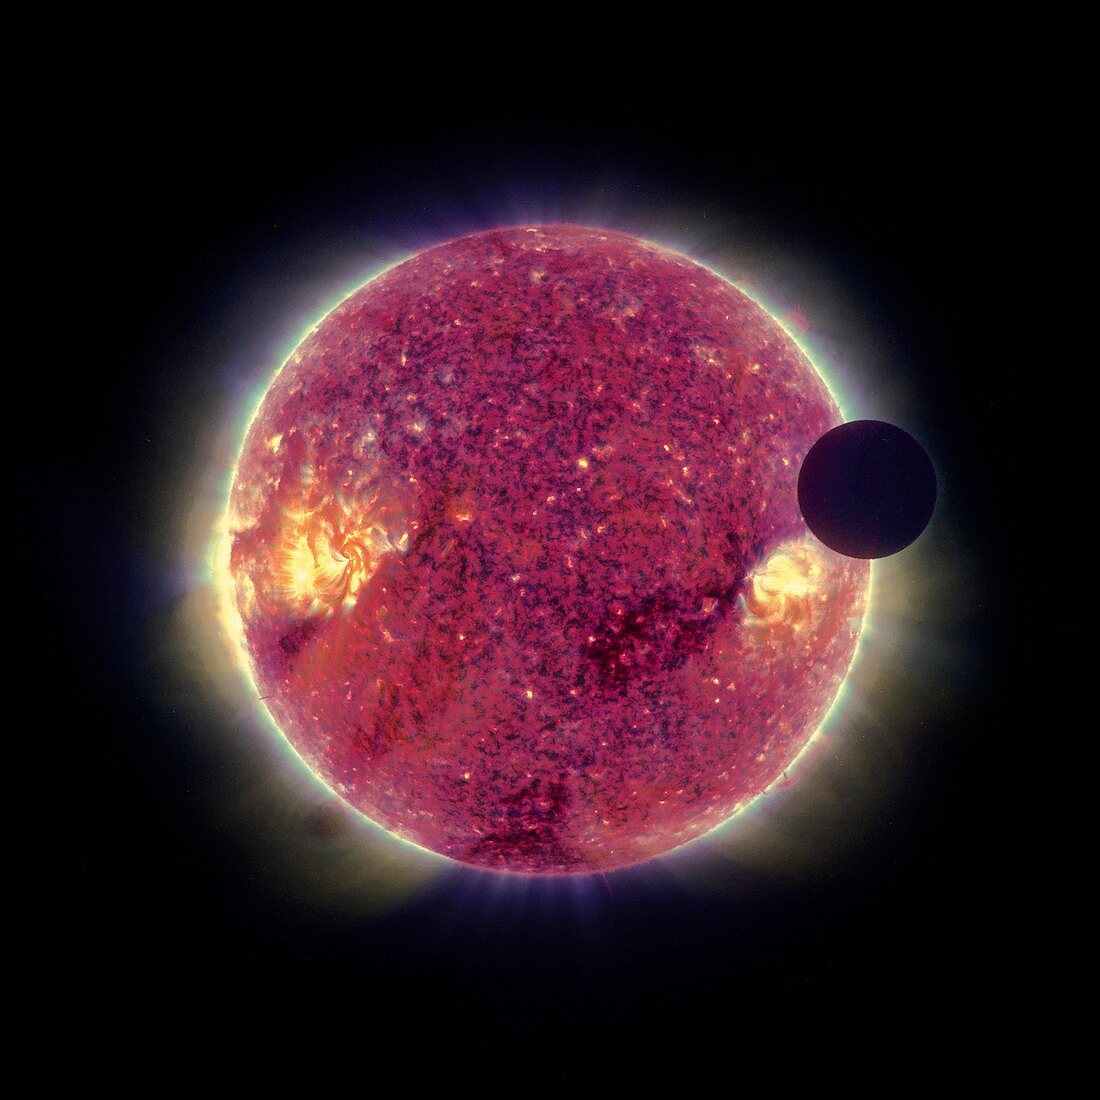 Moon transiting the Sun,STEREO image